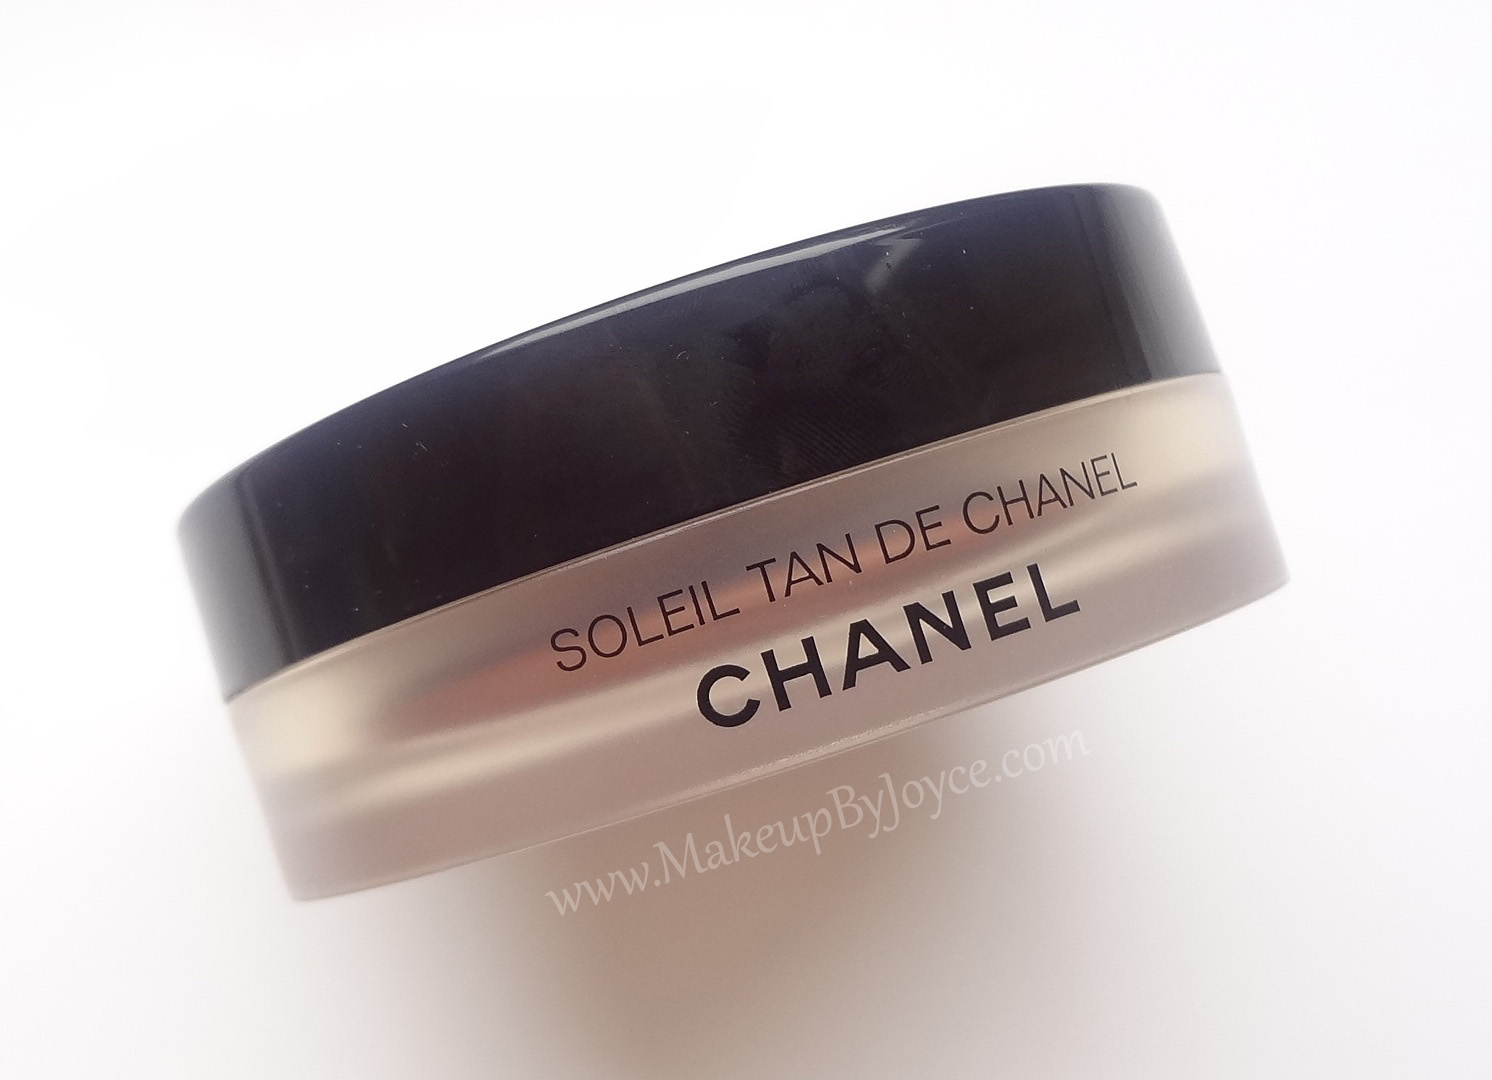 ❤ MakeupByJoyce ❤** !: Swatches + Review - Chanel Soleil Tan De